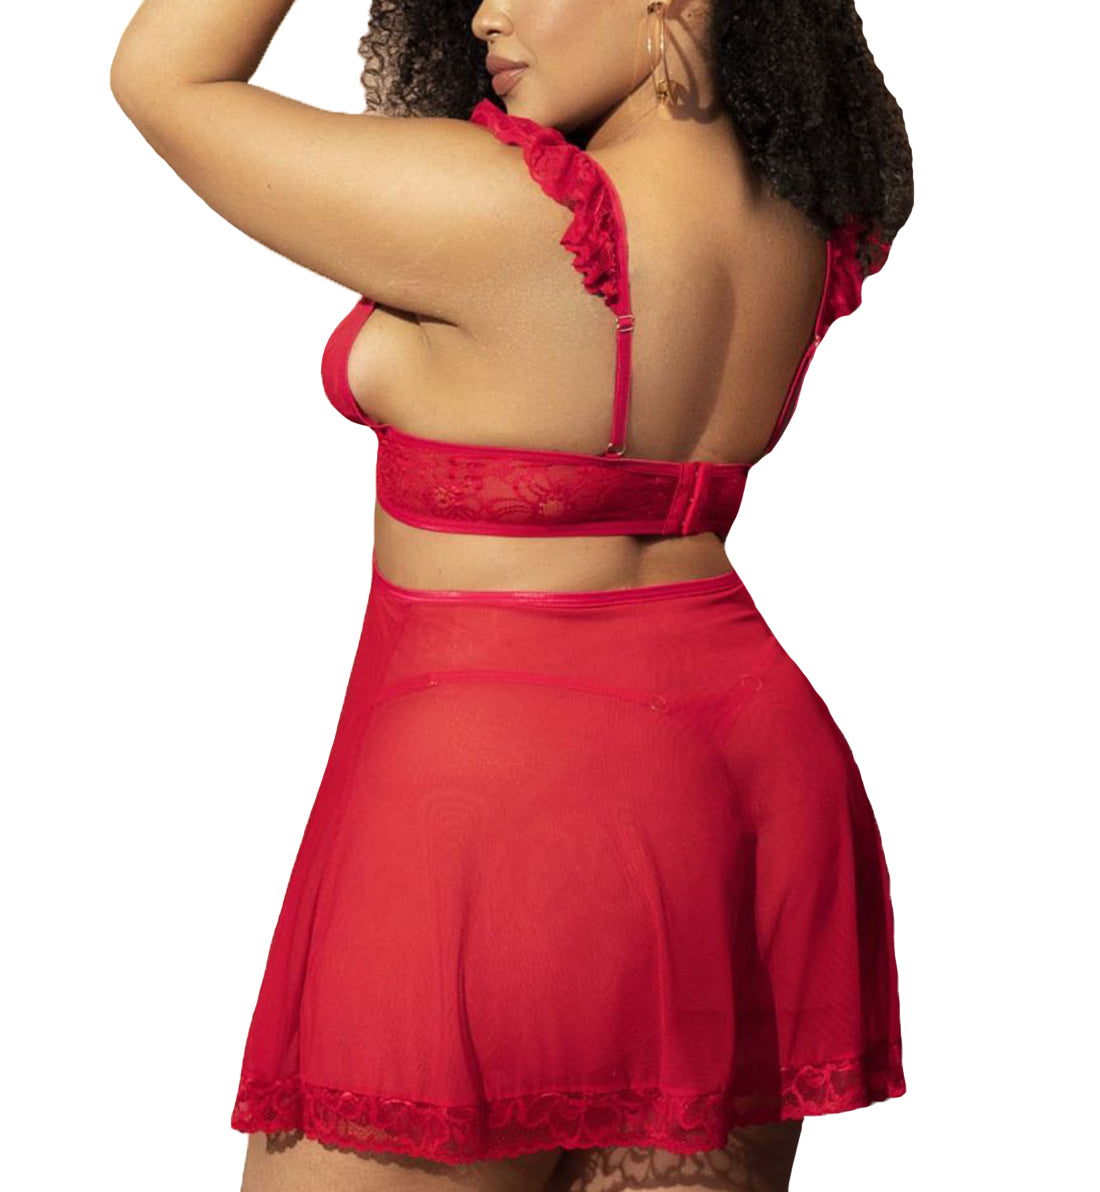 Mapale 2-in-1 Set PLUS: Longline Bralette, Removable Babydoll Skirt, Thong (7386X),1X/2X,Red - Red,1X/2X